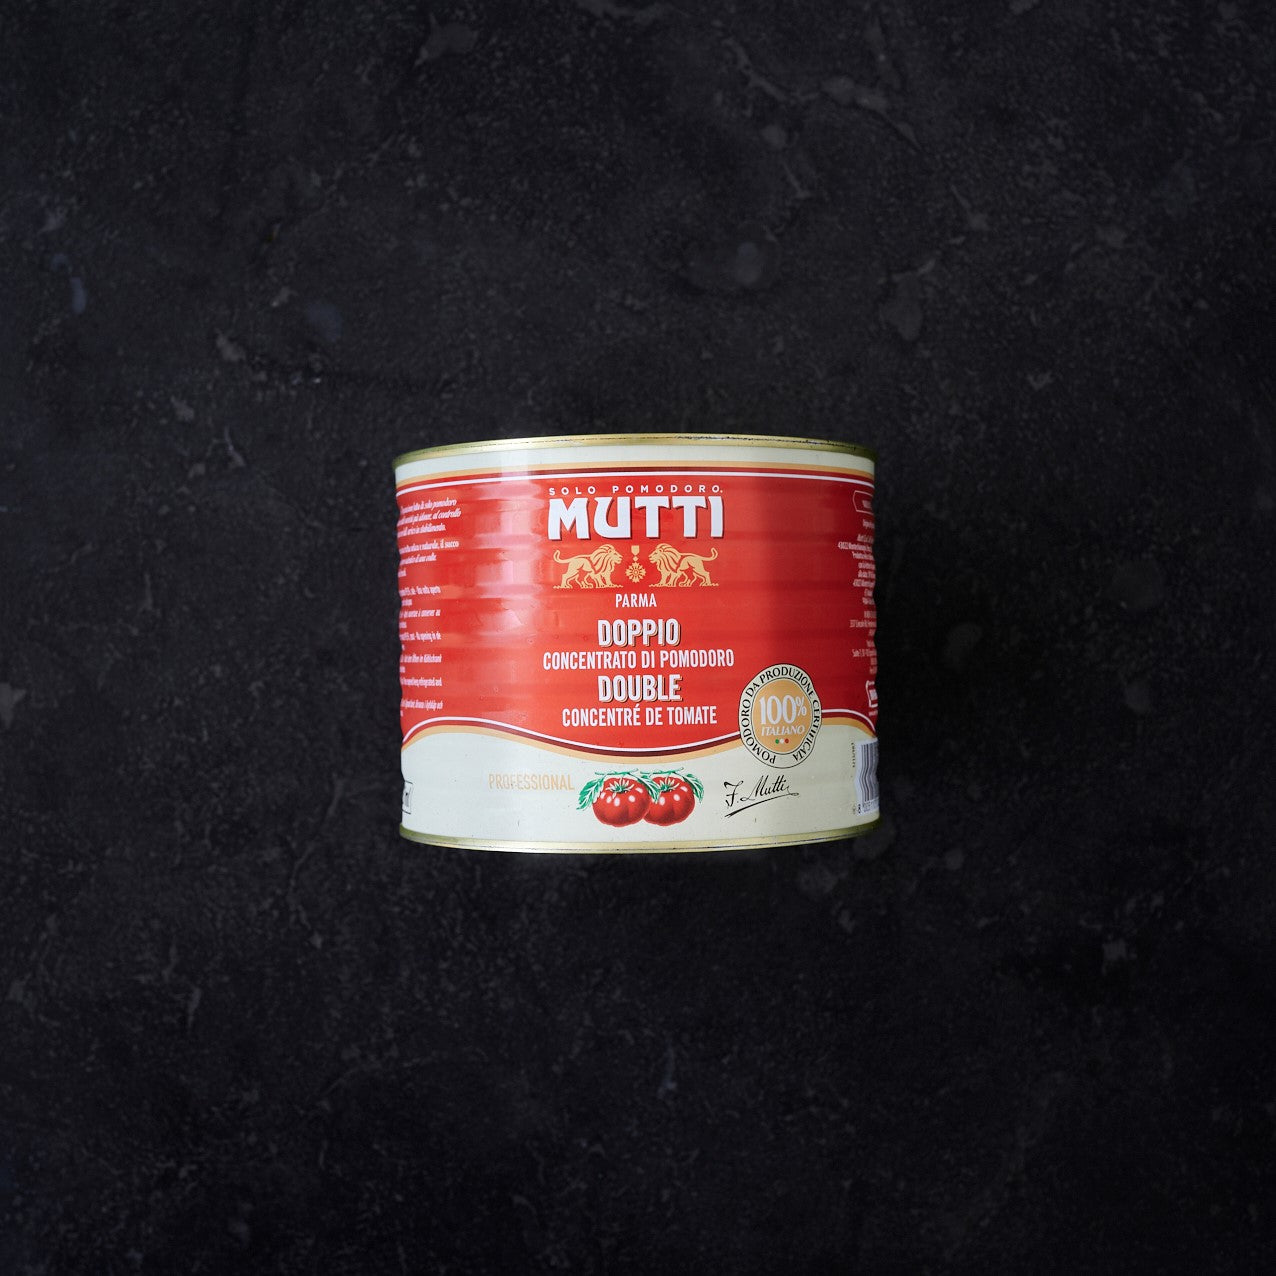 Mutti Double Concentrated Tomato Paste 2.150kg